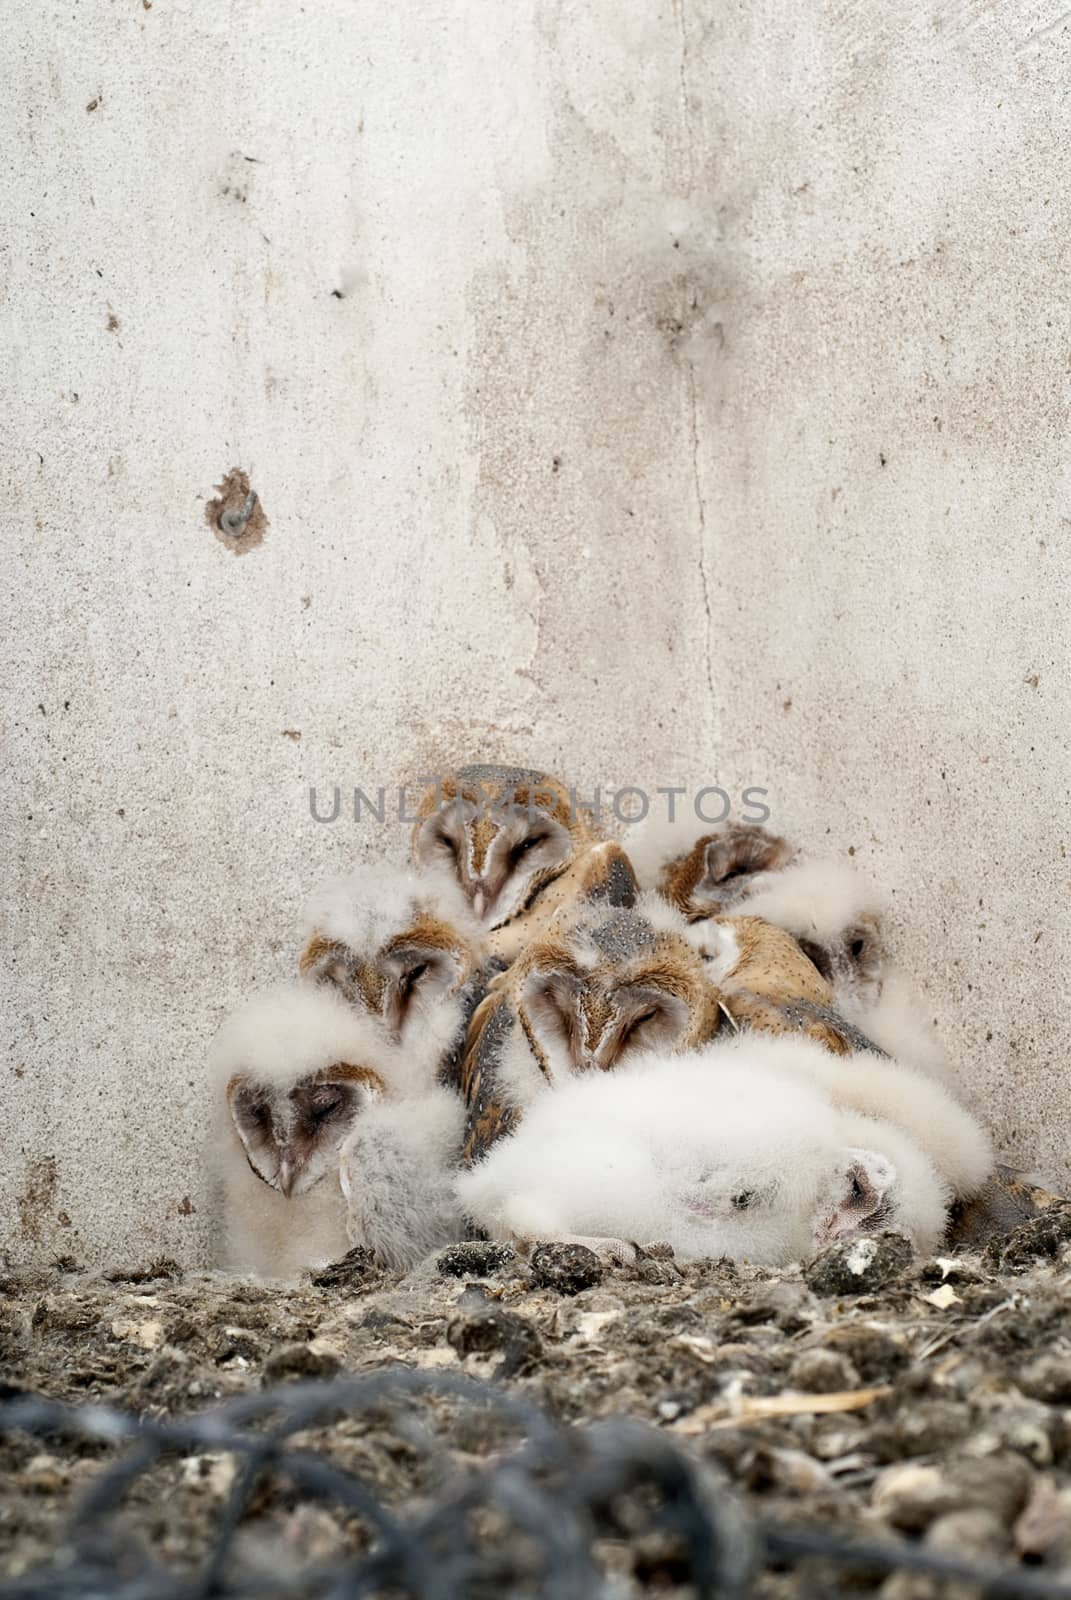 owl (Tyto alba), nest with chickens in an old house by jalonsohu@gmail.com